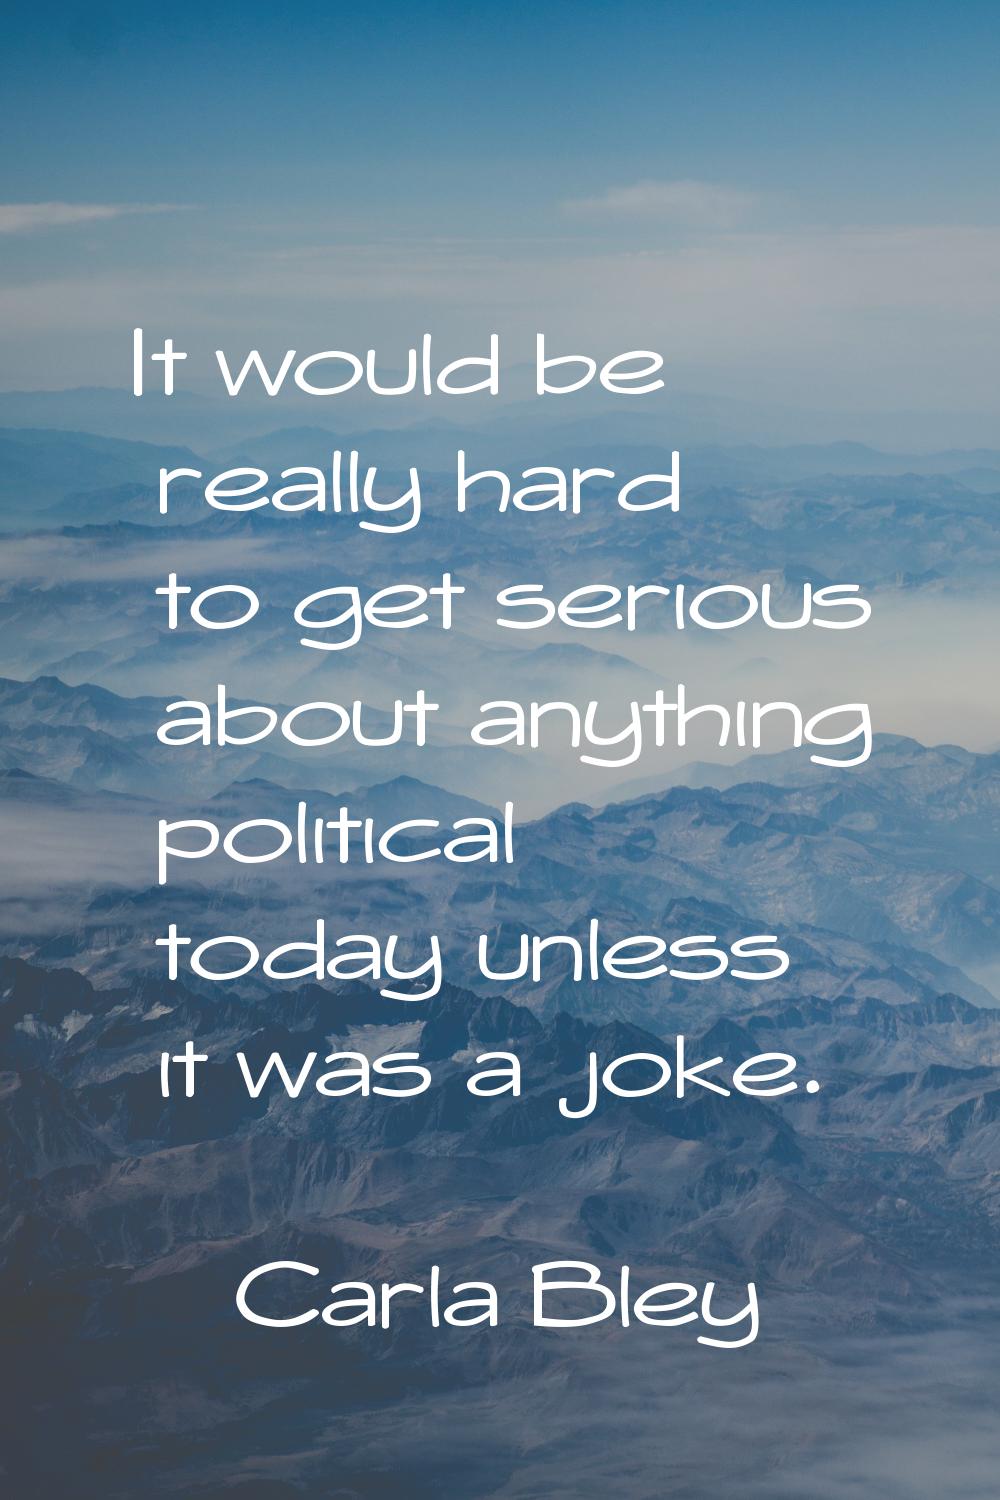 It would be really hard to get serious about anything political today unless it was a joke.